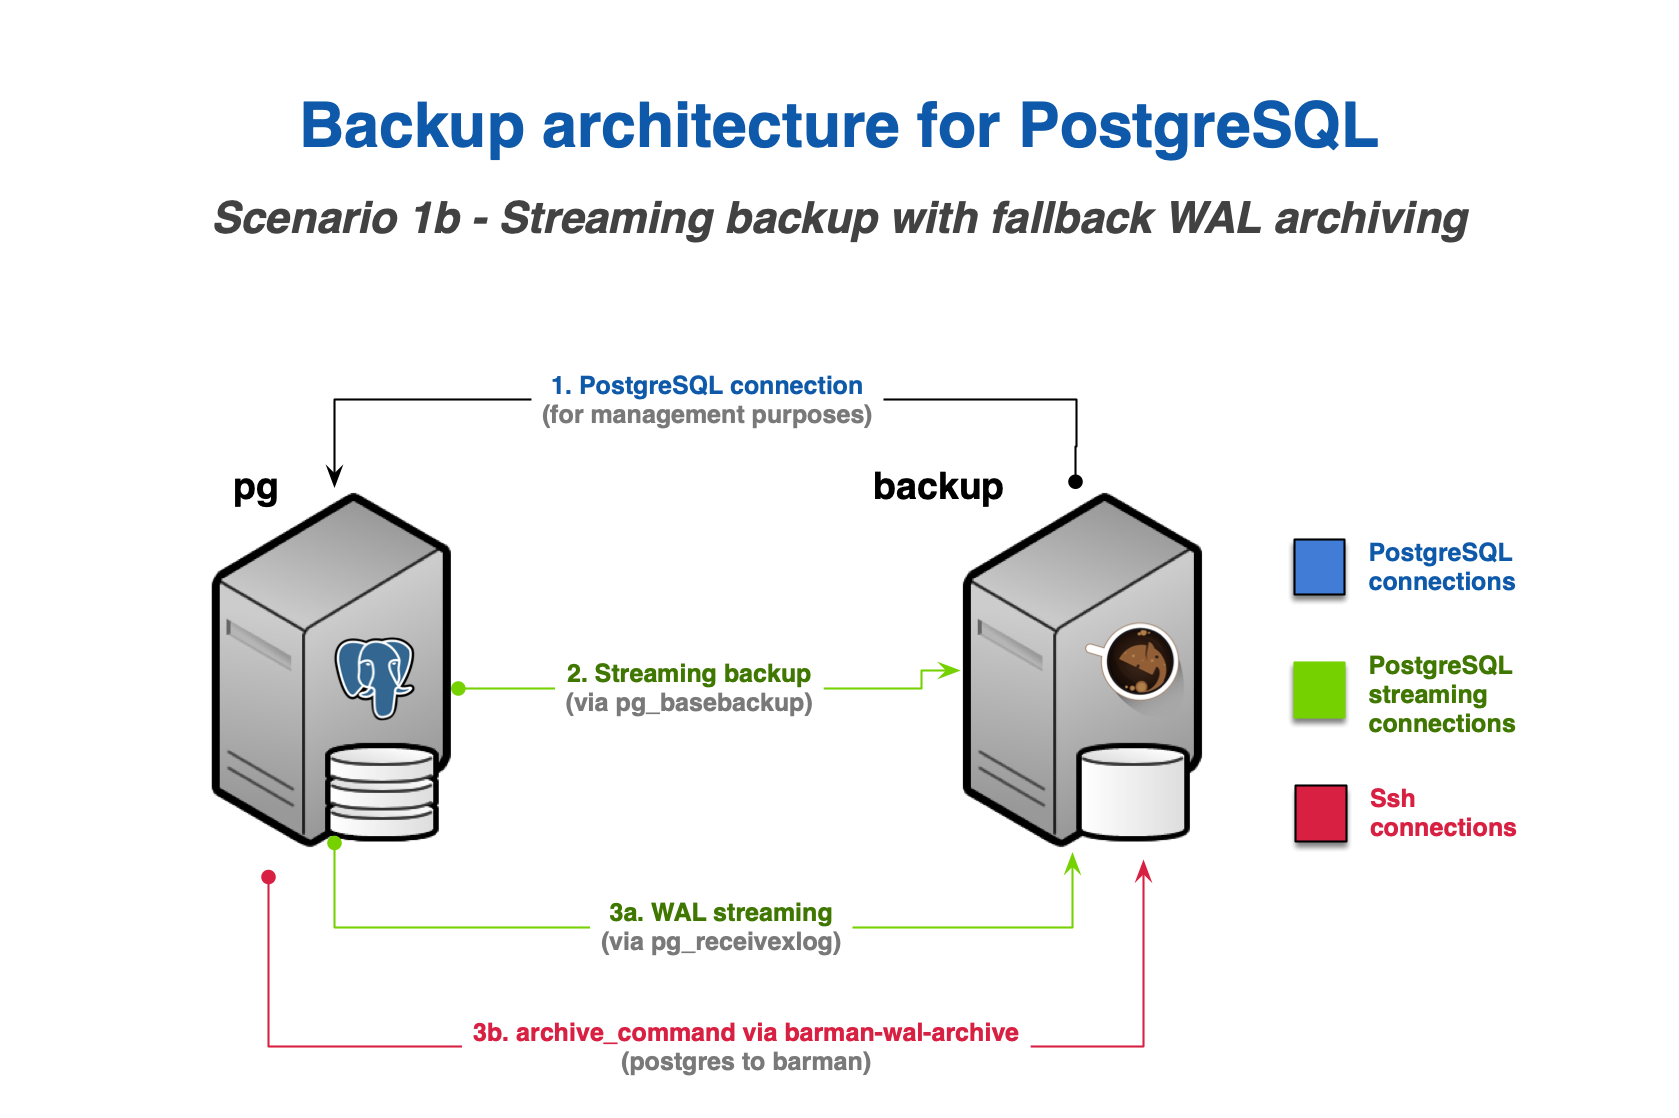 Streaming backup with WAL archiving (Scenario 1b)